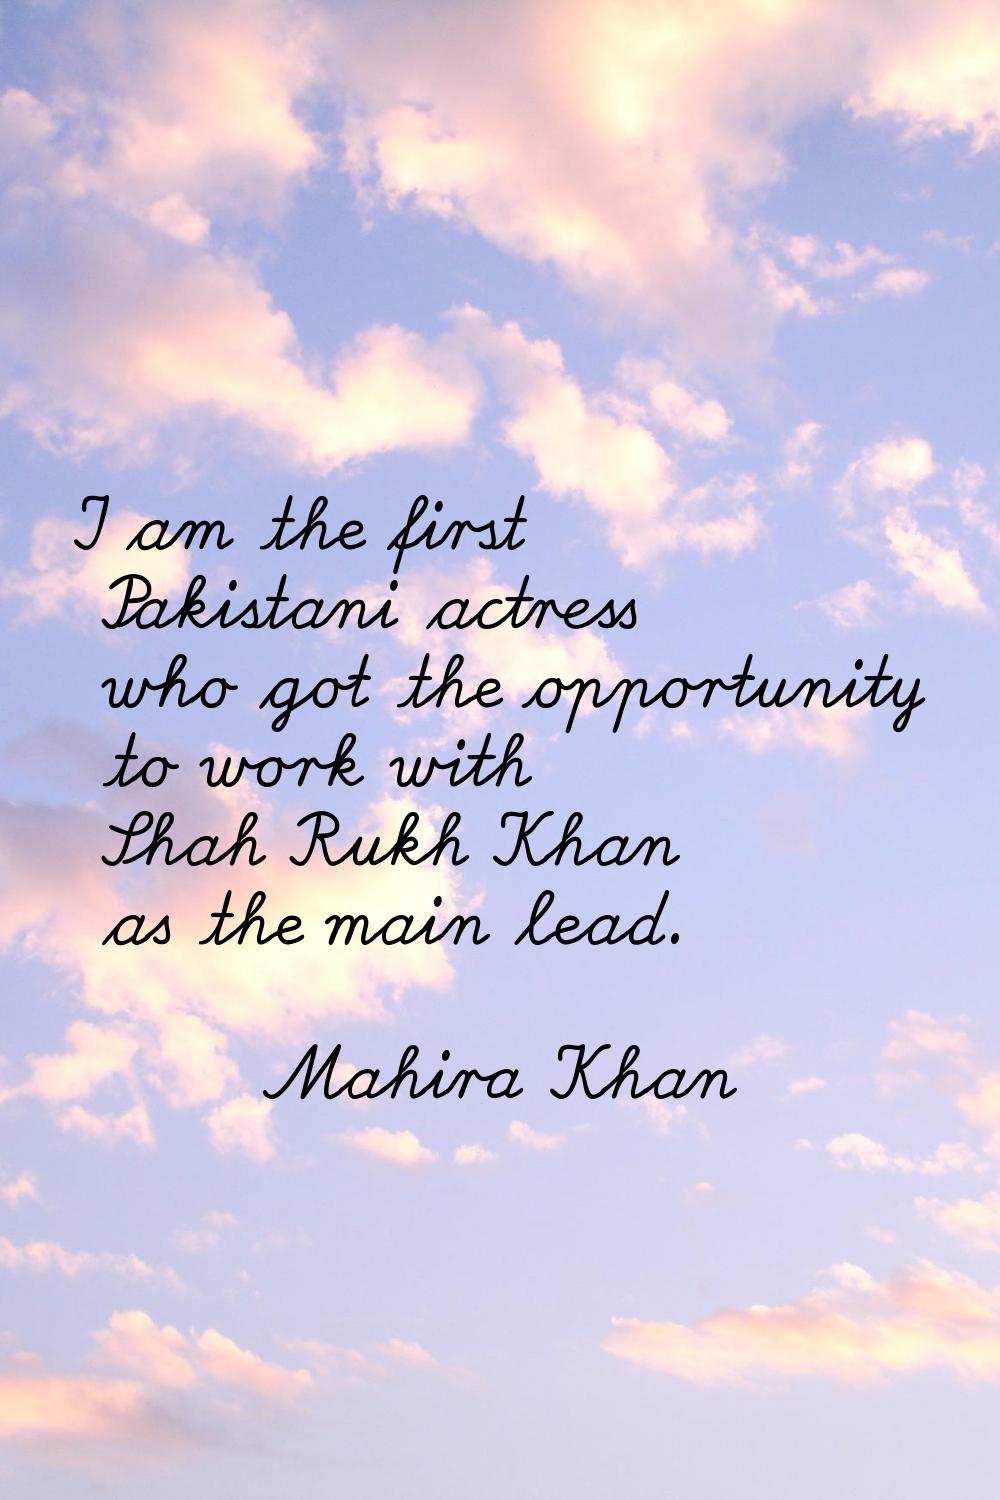 I am the first Pakistani actress who got the opportunity to work with Shah Rukh Khan as the main le